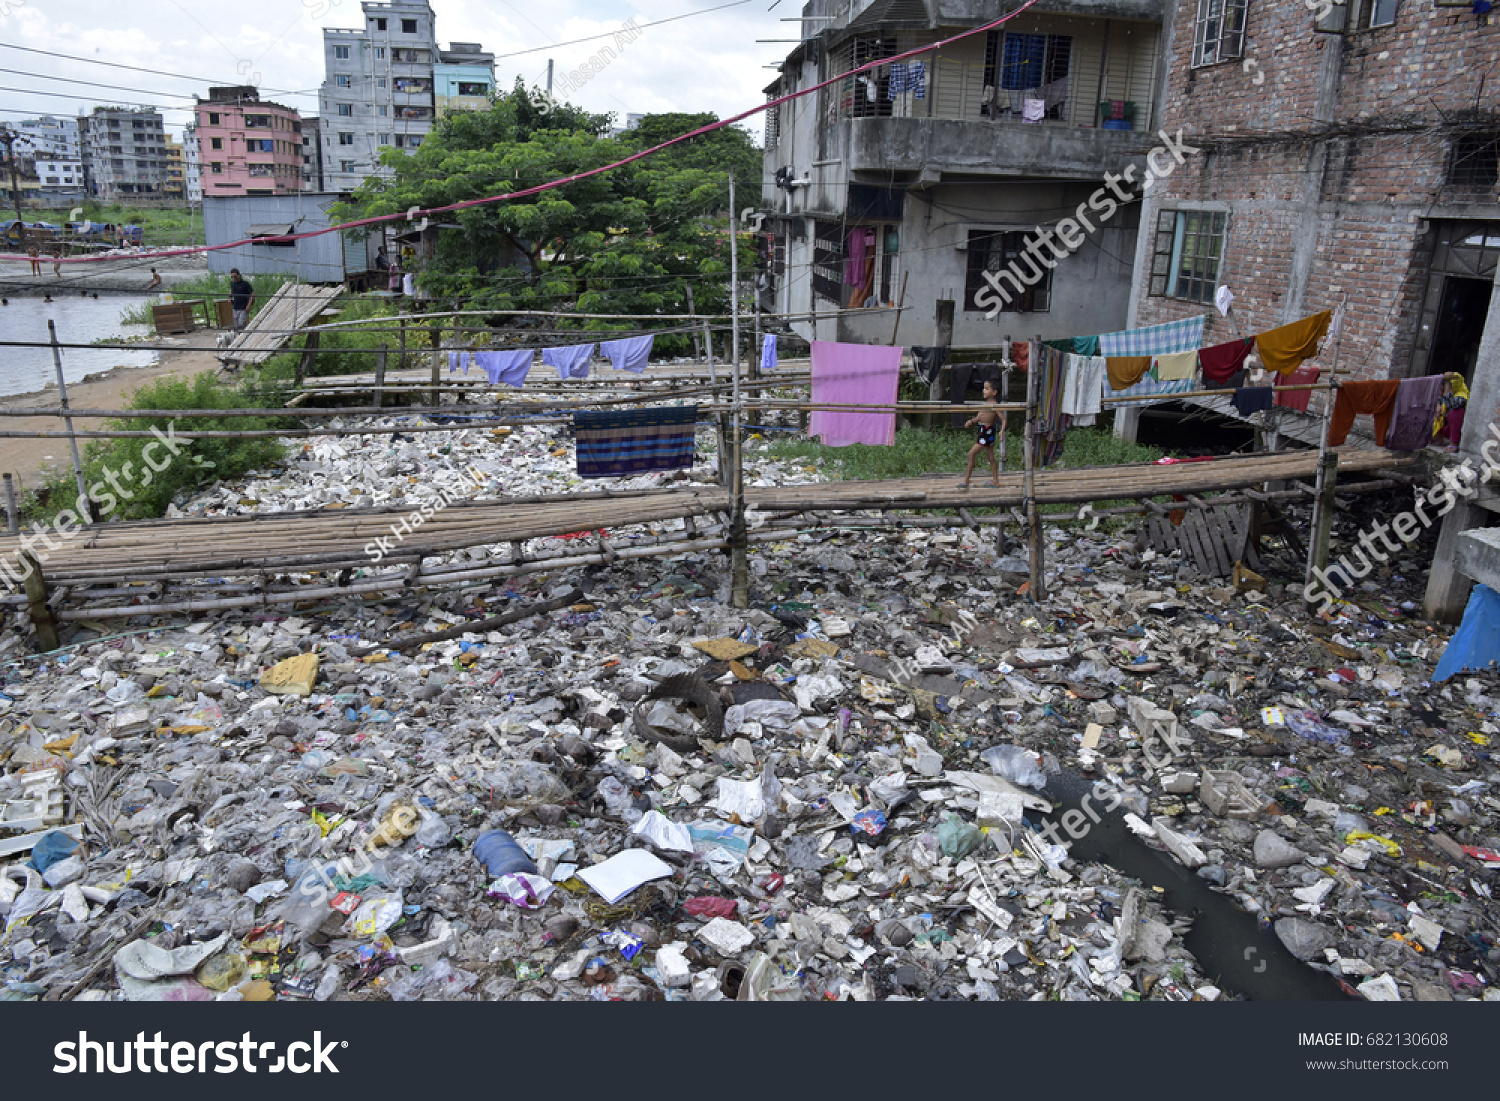 DHAKA, BANGLADESH - JULY 22, 2017: A canal full with wastage and plastic materials in Dhaka, Bangladesh on July 22, 2017. #682130608